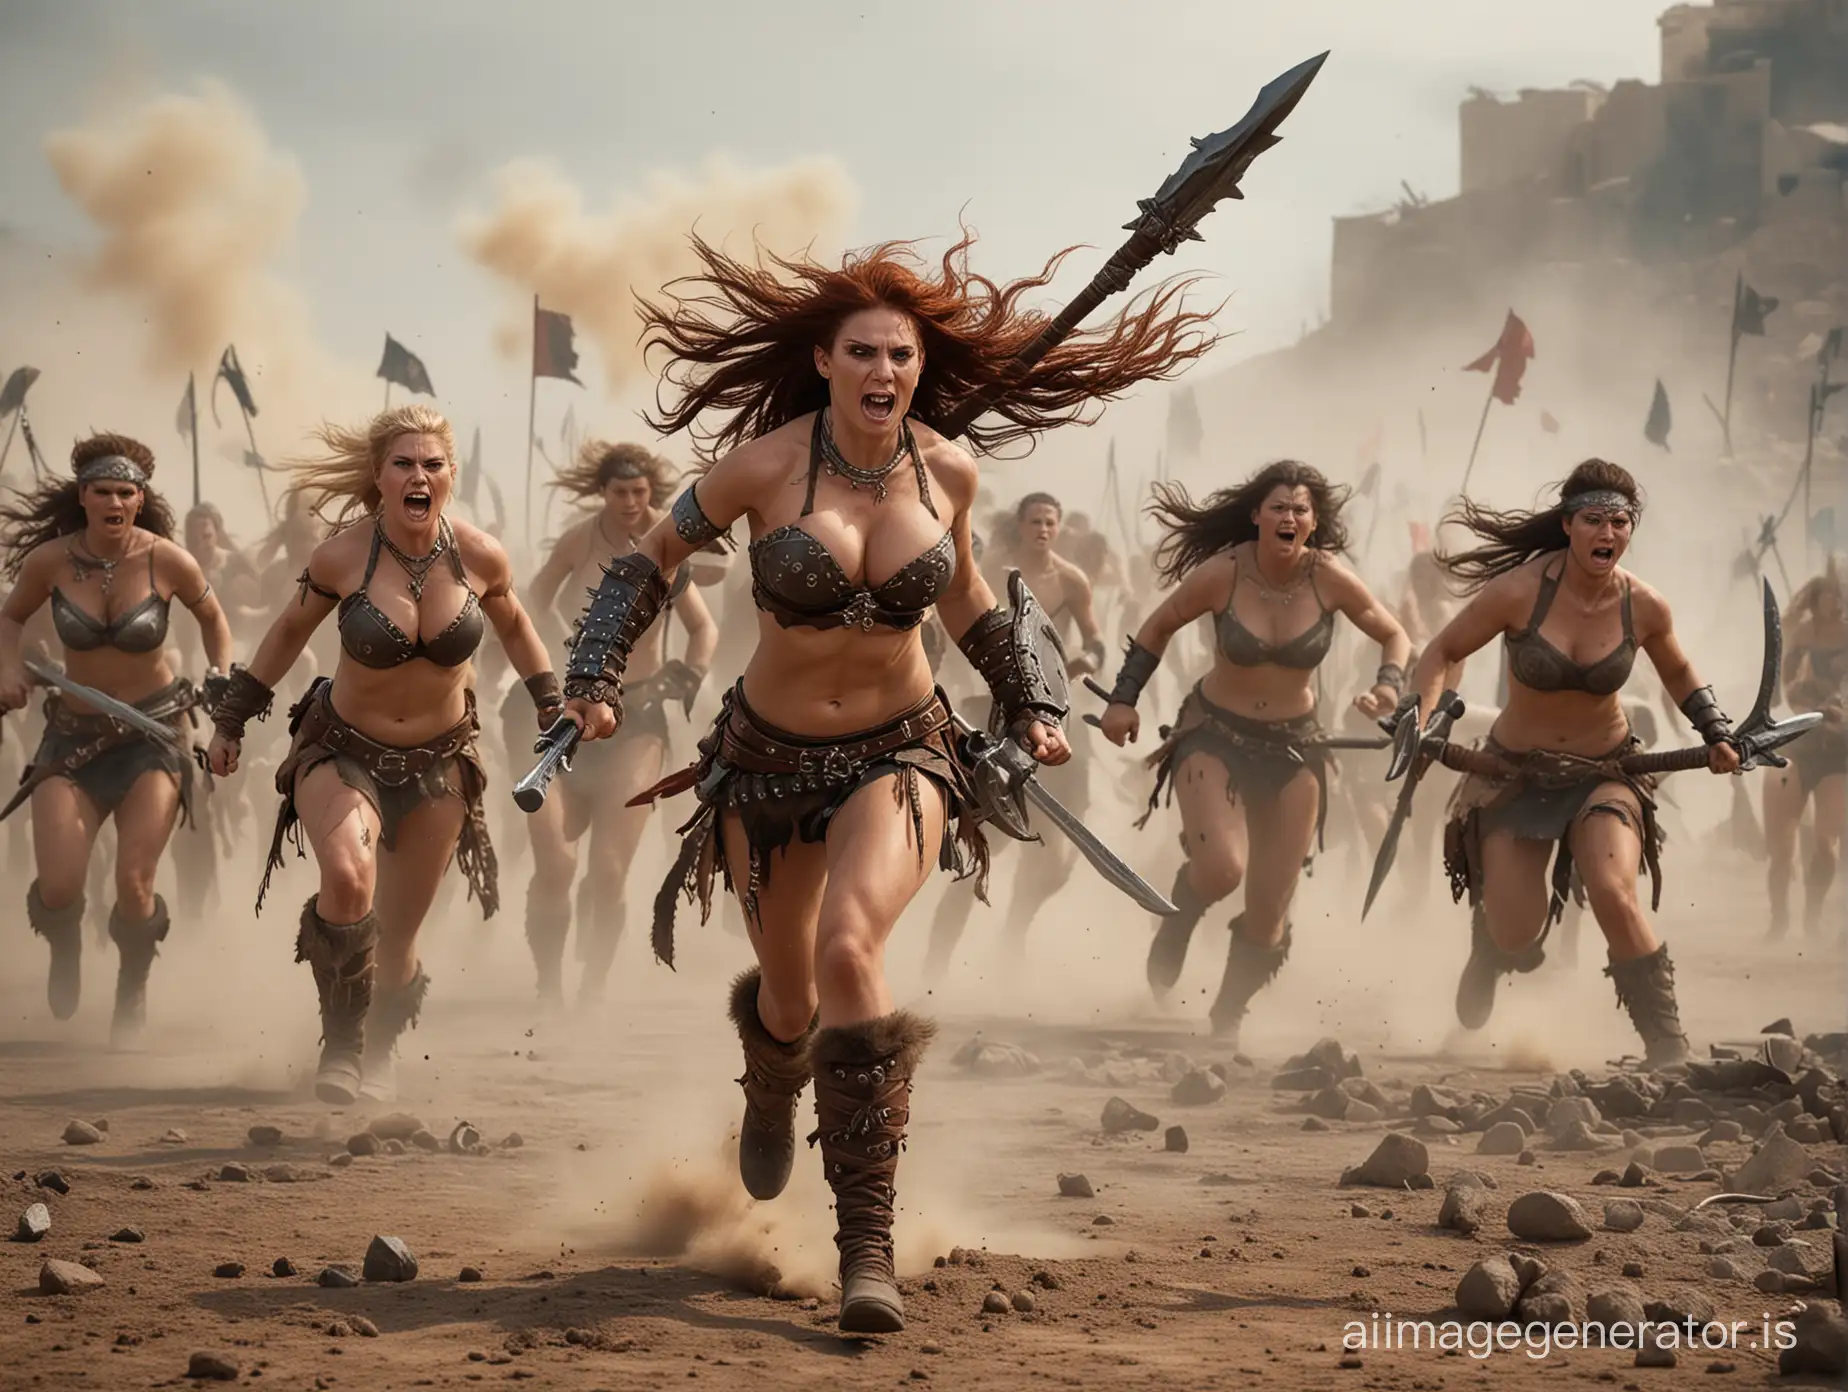 Scantily clad female barbarian horde charges, running, over the battlefield, kicking up dust, weapons raised.
Chaos and fires